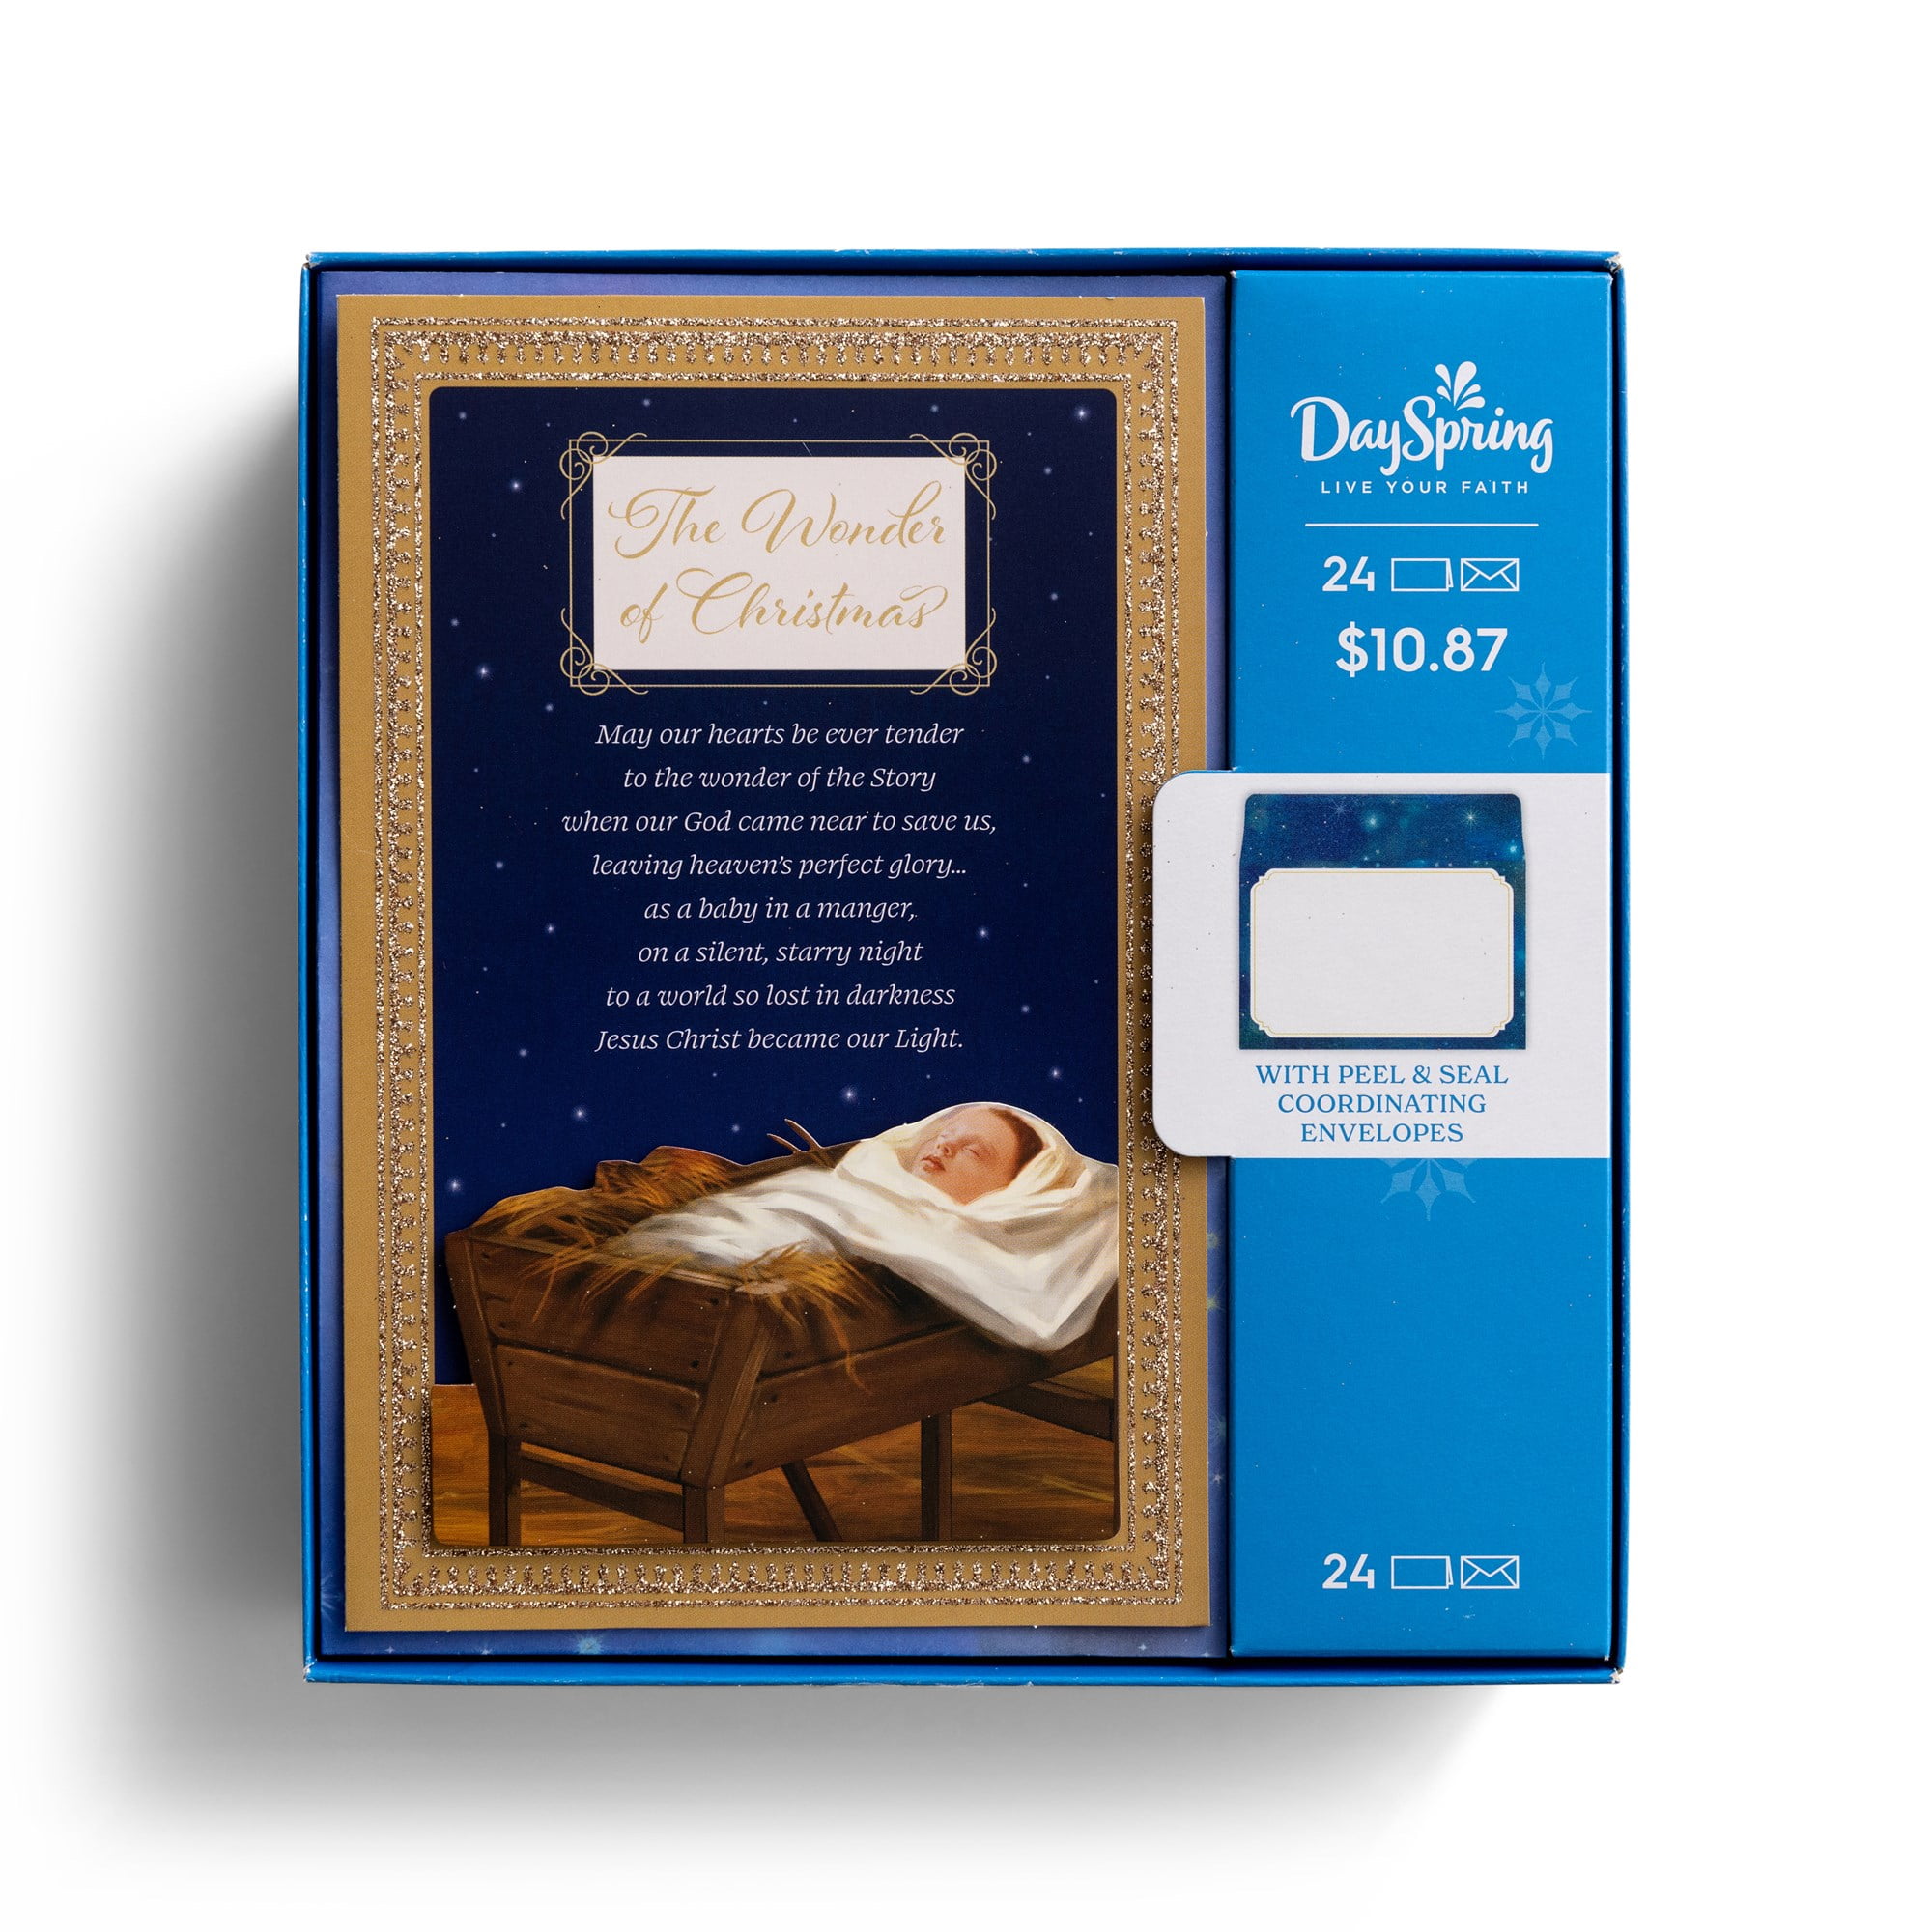 DaySpring 24 Inspirational Christmas Boxed Cards, Jesus in manger, The Wonder of Christmas